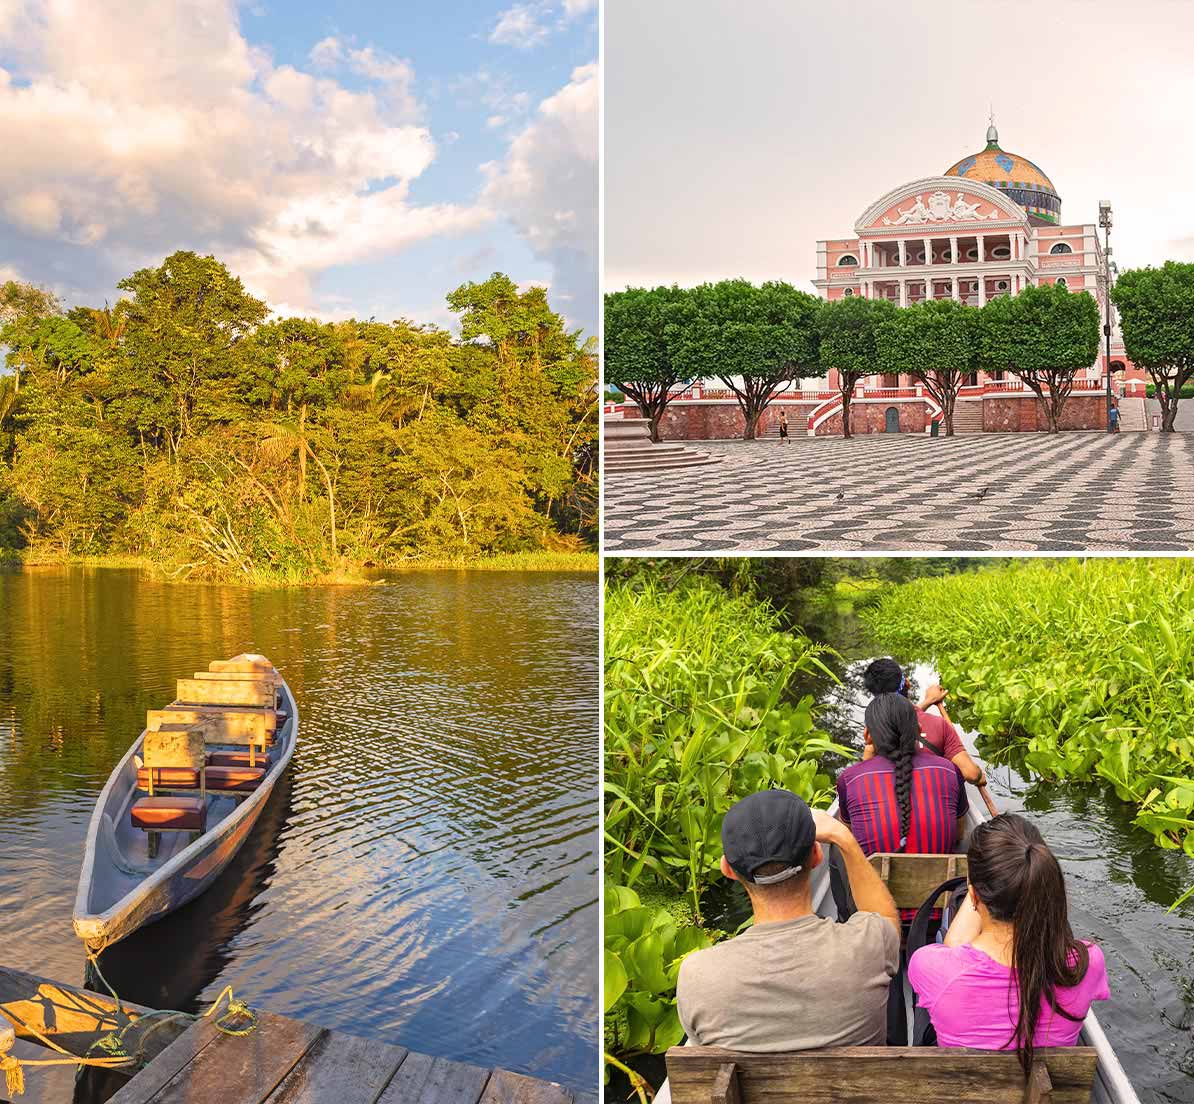  A collage of a docked canoe, the Amazon Theatre in Manaus, and a group navigating a floodplain.